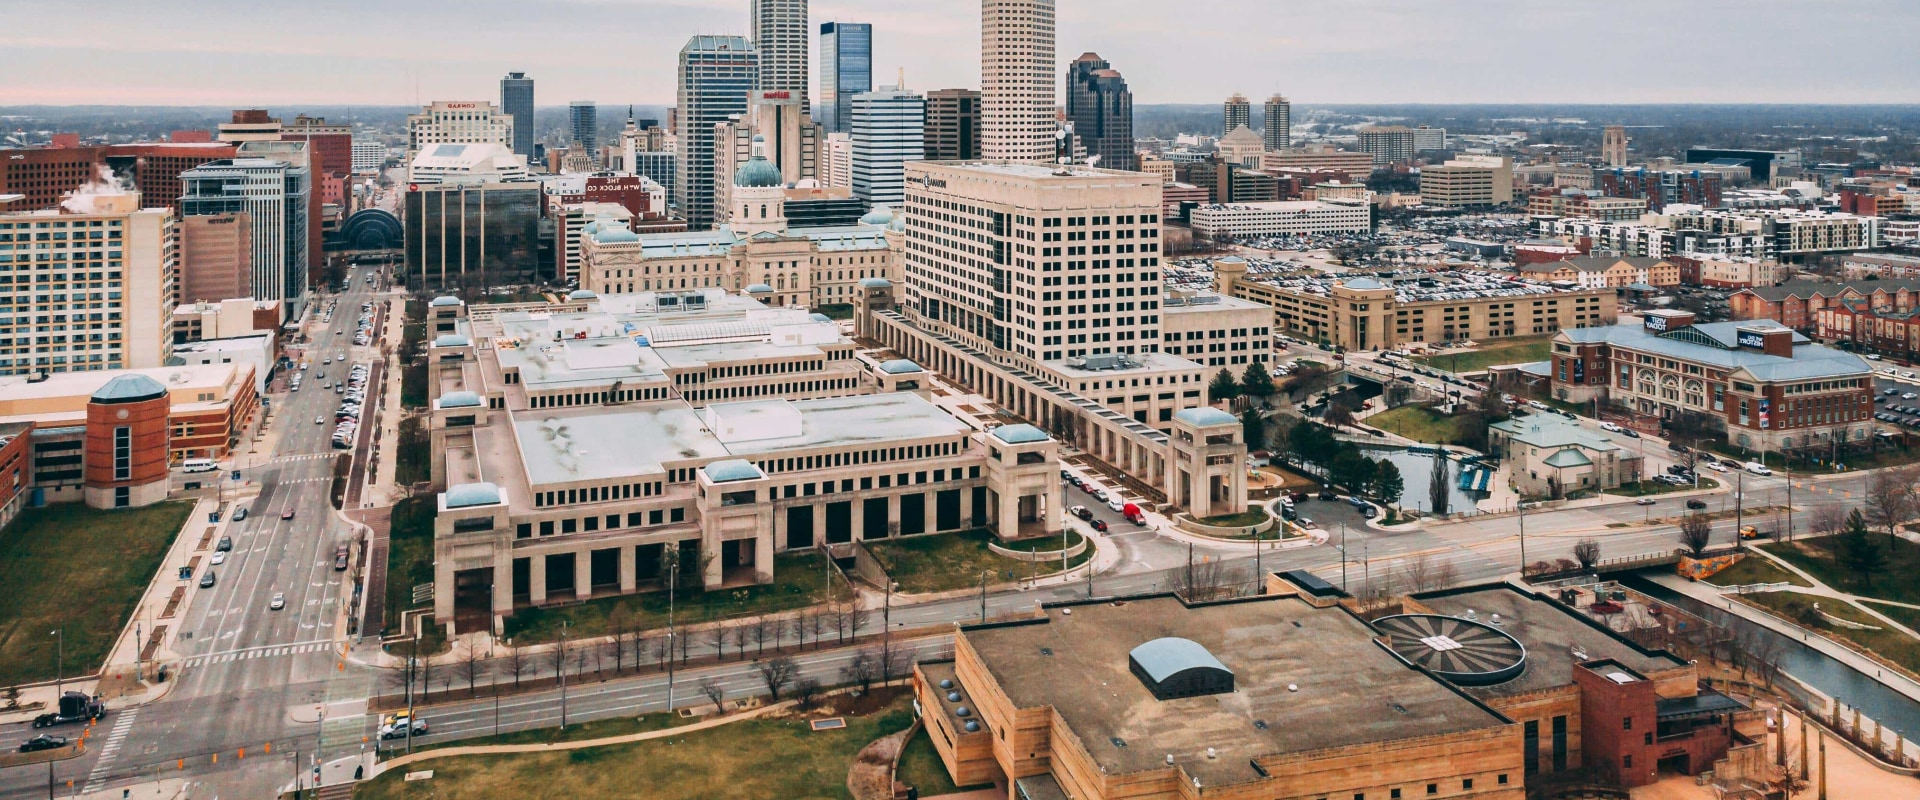 Finding Employment in Indianapolis, Indiana: Resources to Help You Get Started